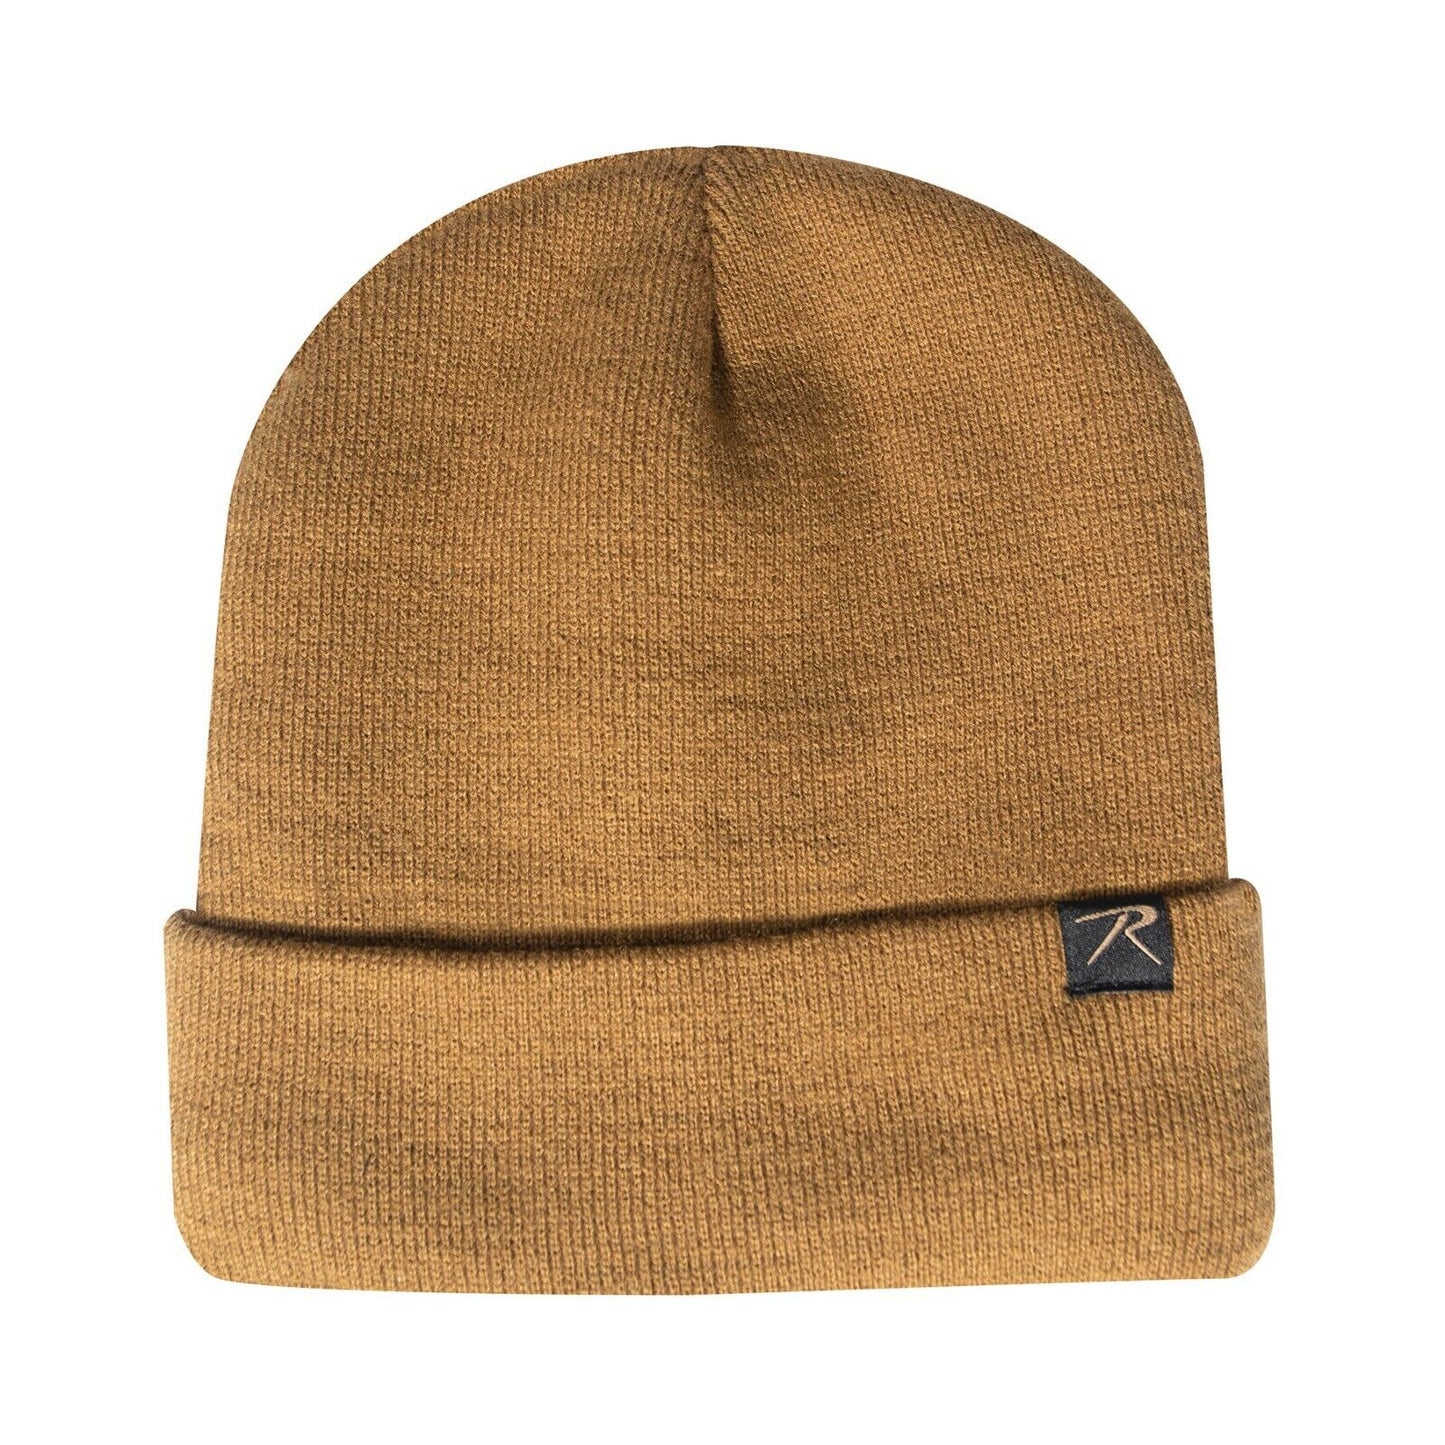 Deluxe Fine Knit Sherpa-Lined Winter Watch Cap in Black or Coyote Brown